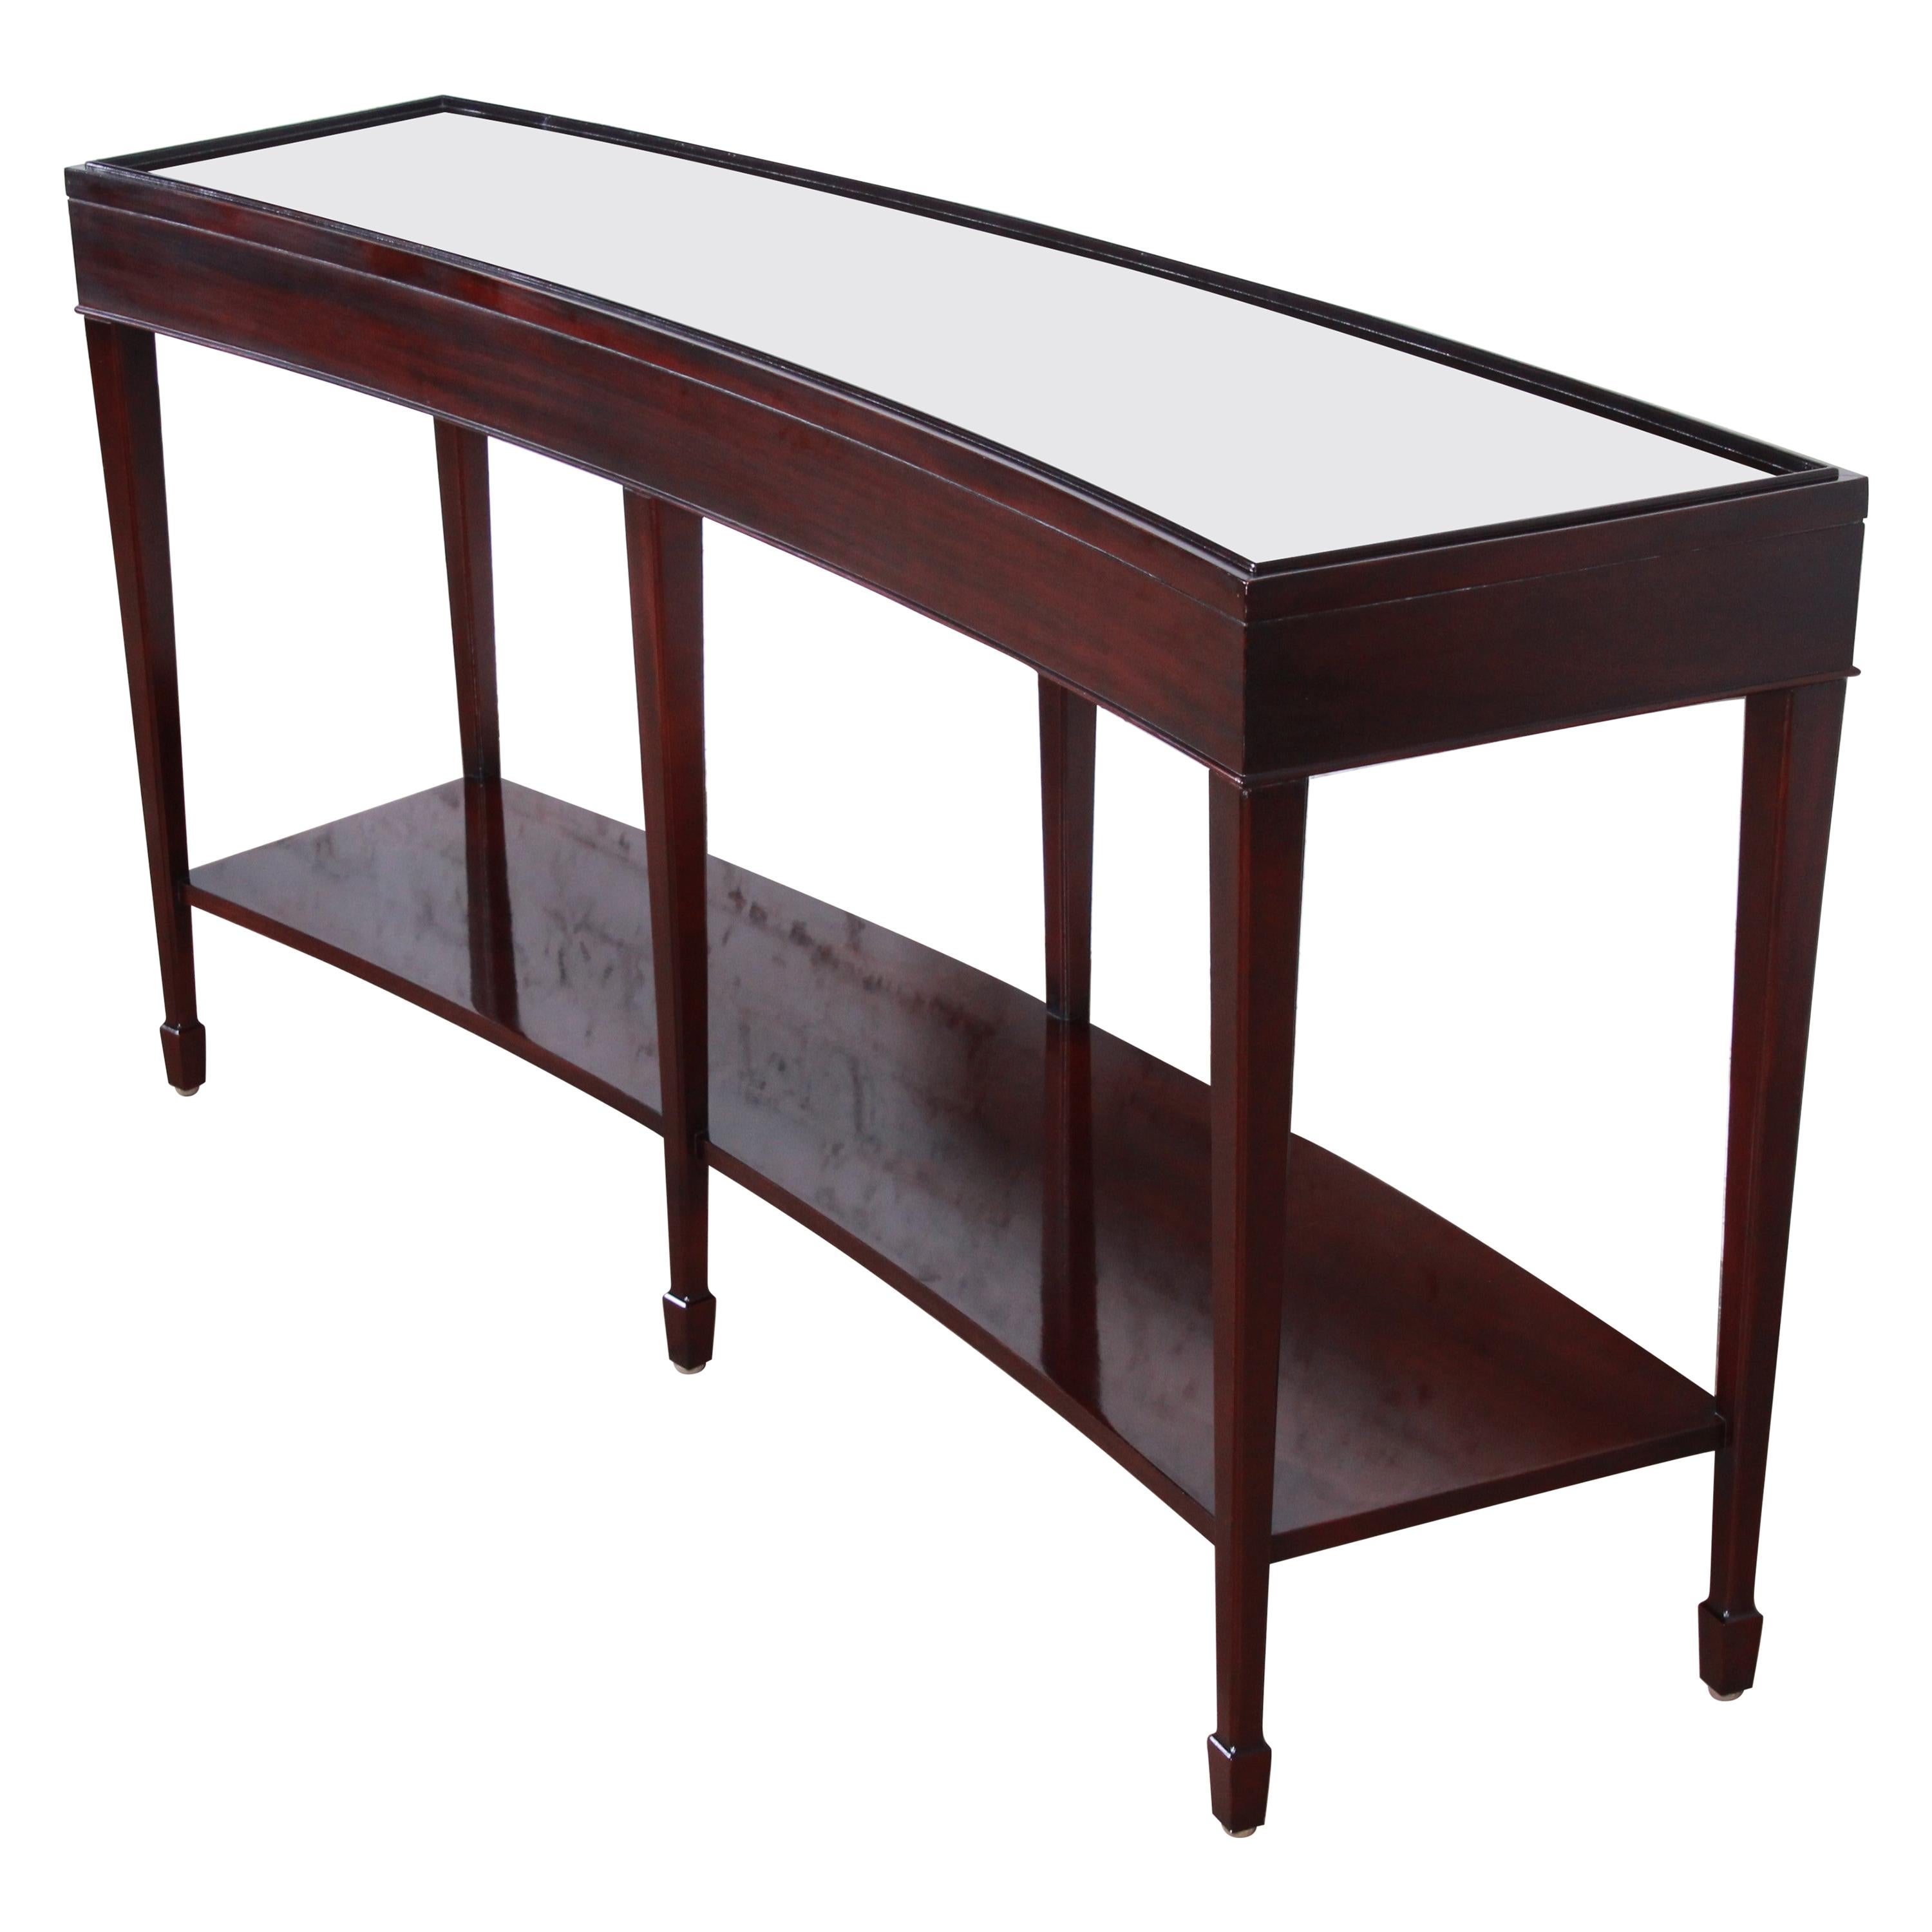 Barbara Barry for Baker Furniture Dark Mahogany Curved Console or Sofa Table